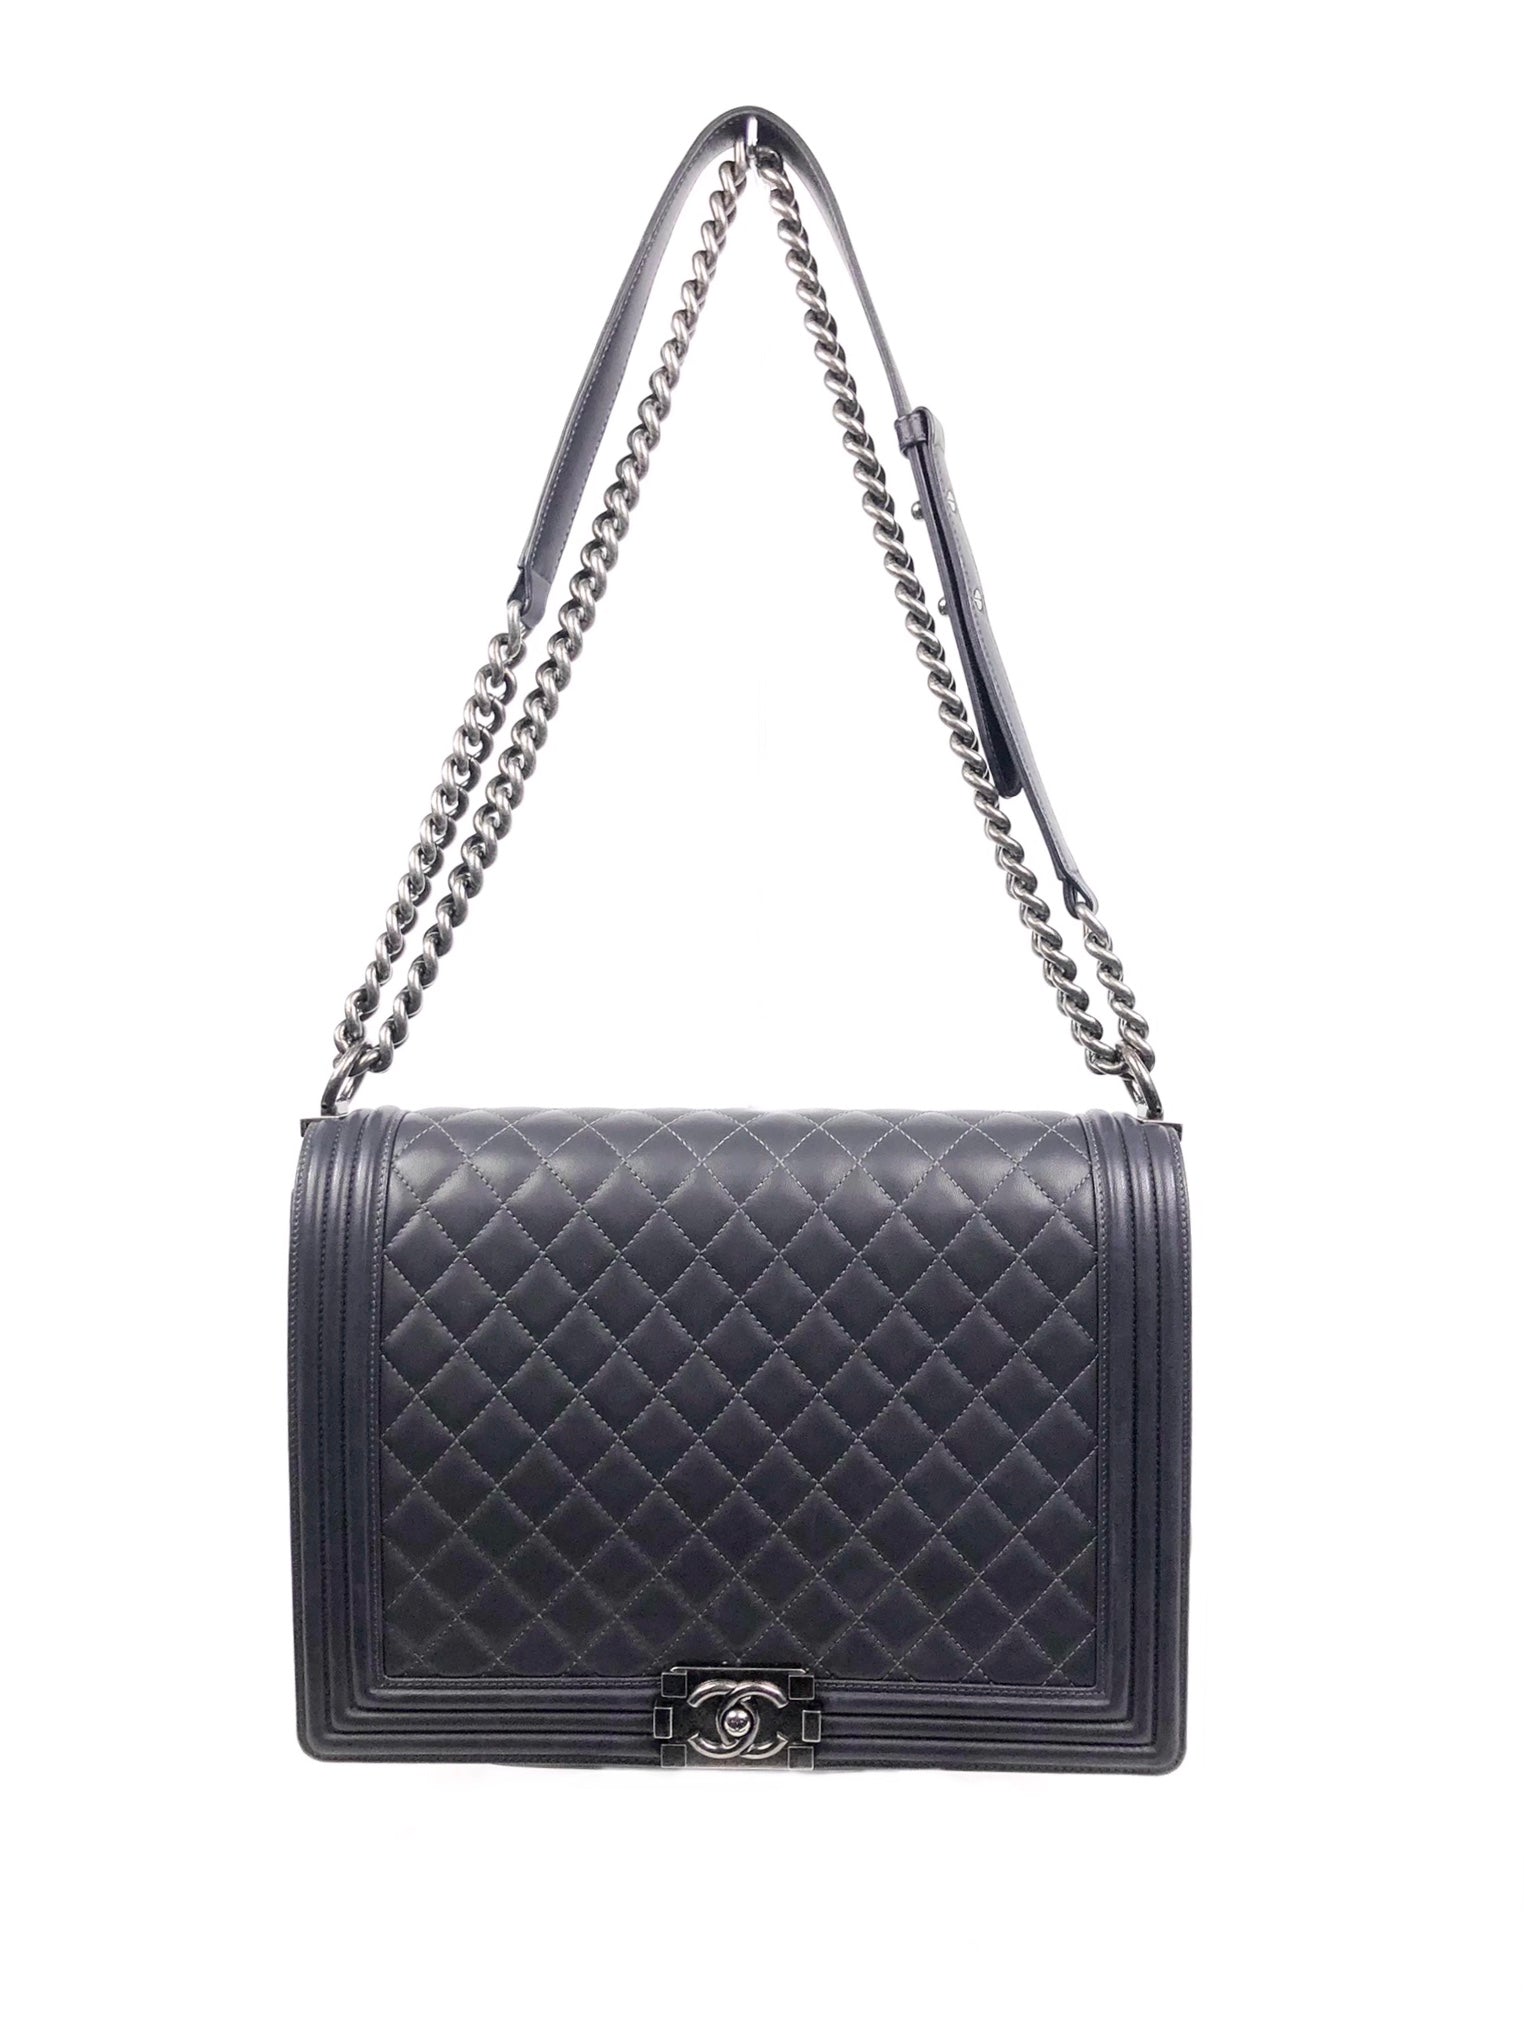 Chanel Boy Bag Medium Duo Quilted Goatskin and Patent Leather with Rut   Exquisite Artichoke